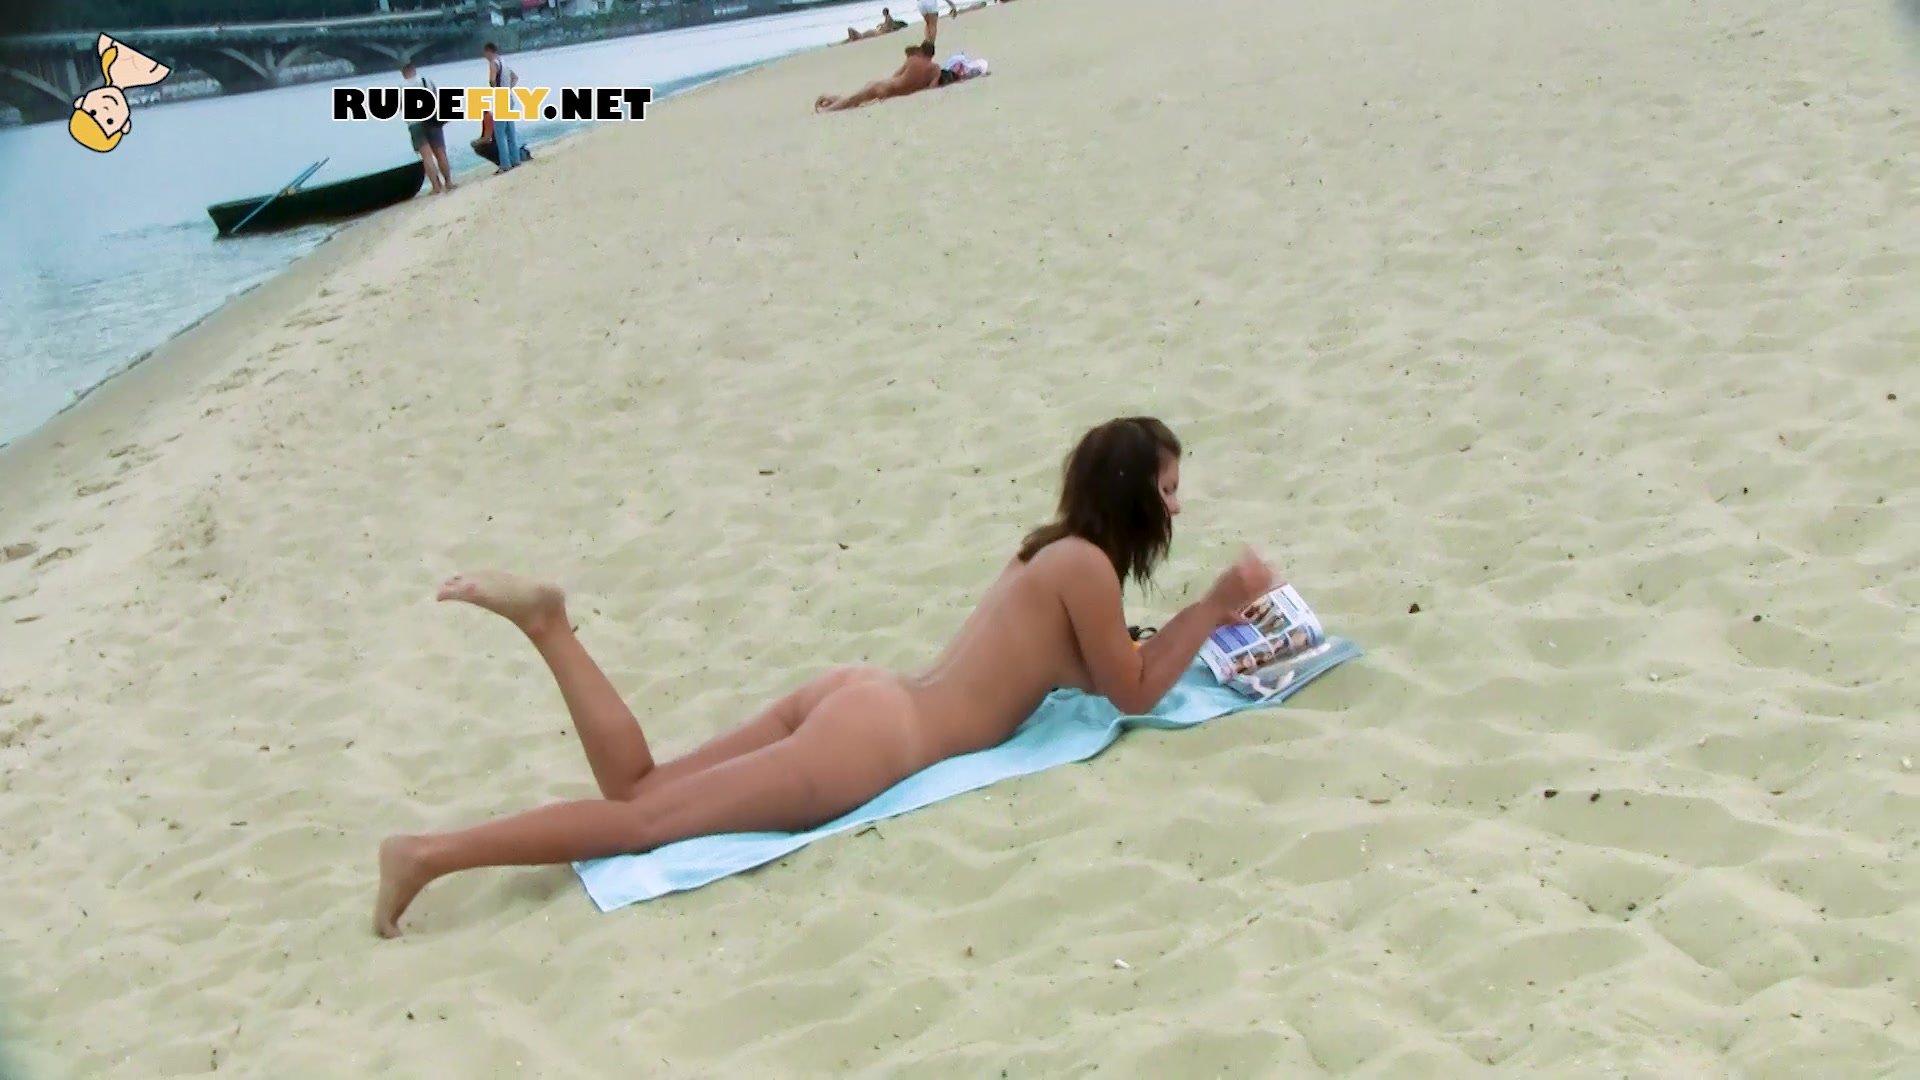 Some of the most gorgeous nudist teens out at the beach